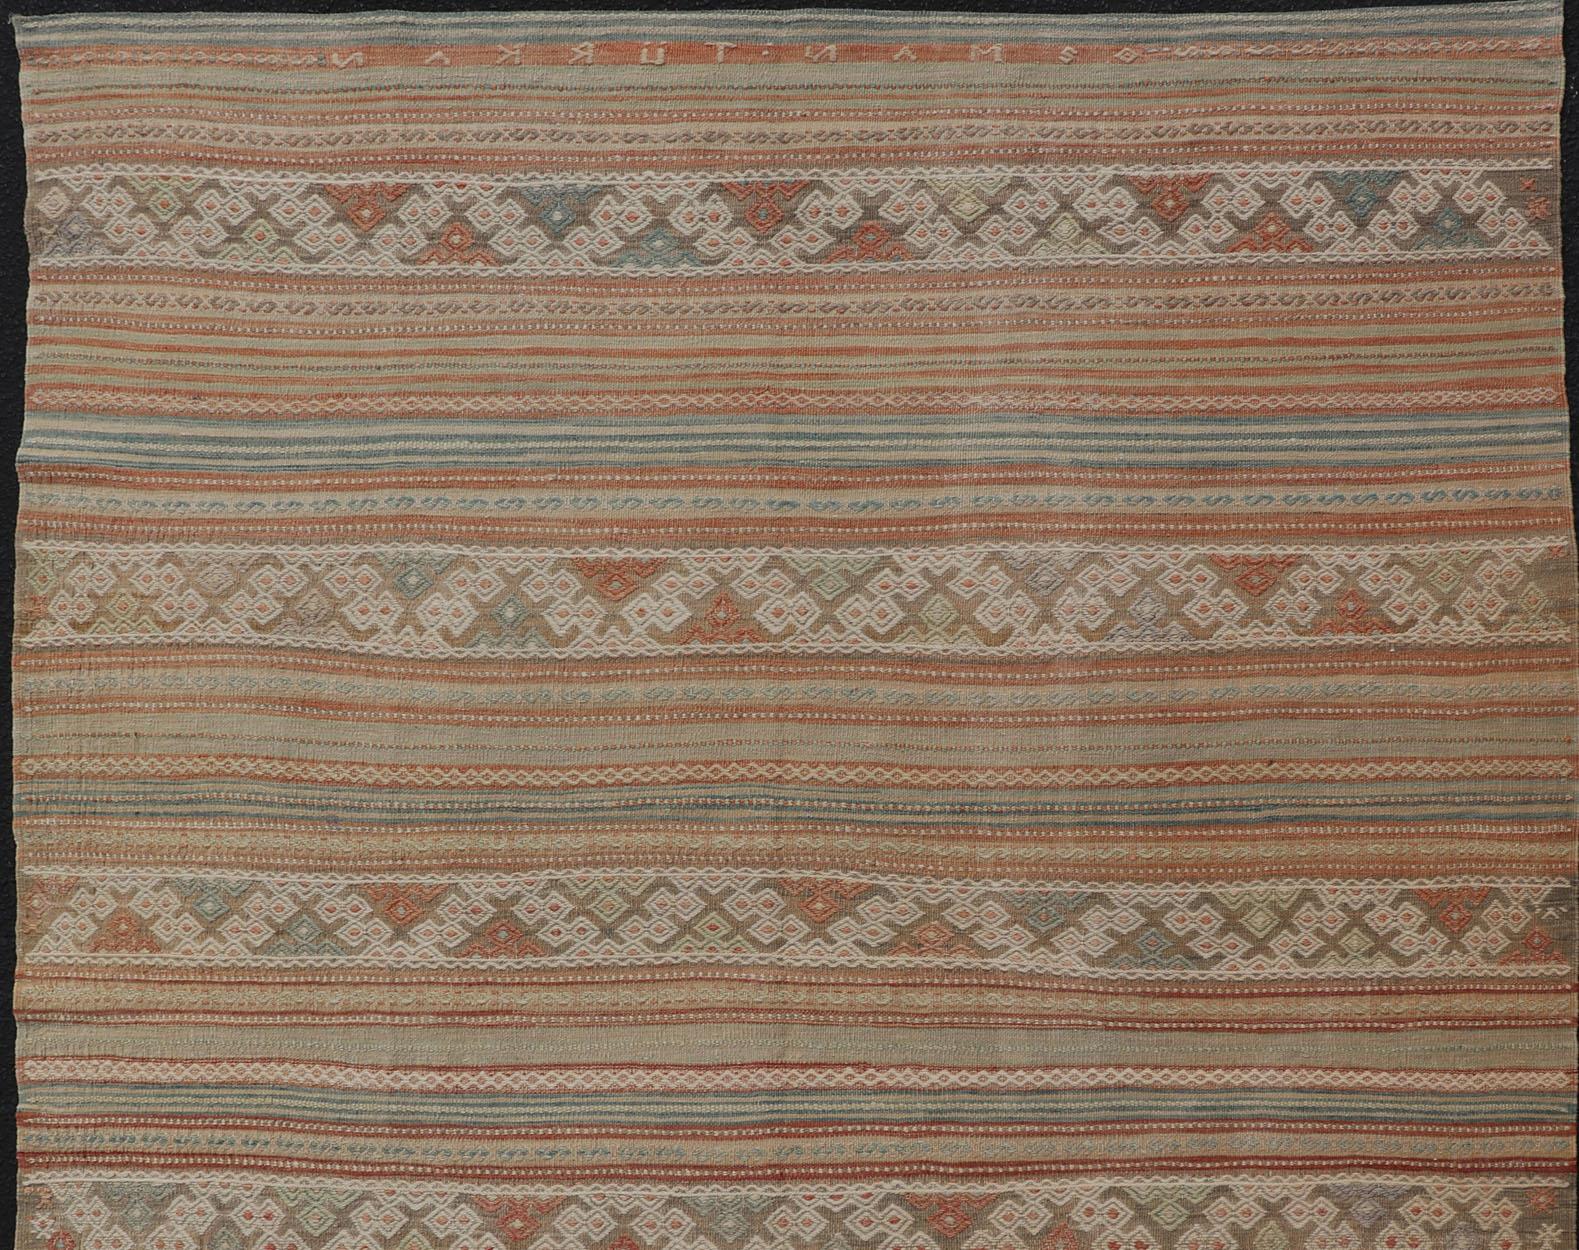 Geometric stripe design Kilim rug in multi-colors in muted tones, rug EN-179892, country of origin / type: Turkey / Kilim, circa 1950

Measures: 6'1 x 8'9

This vintage Kilim displays an array of designs, including a striped pattern and small